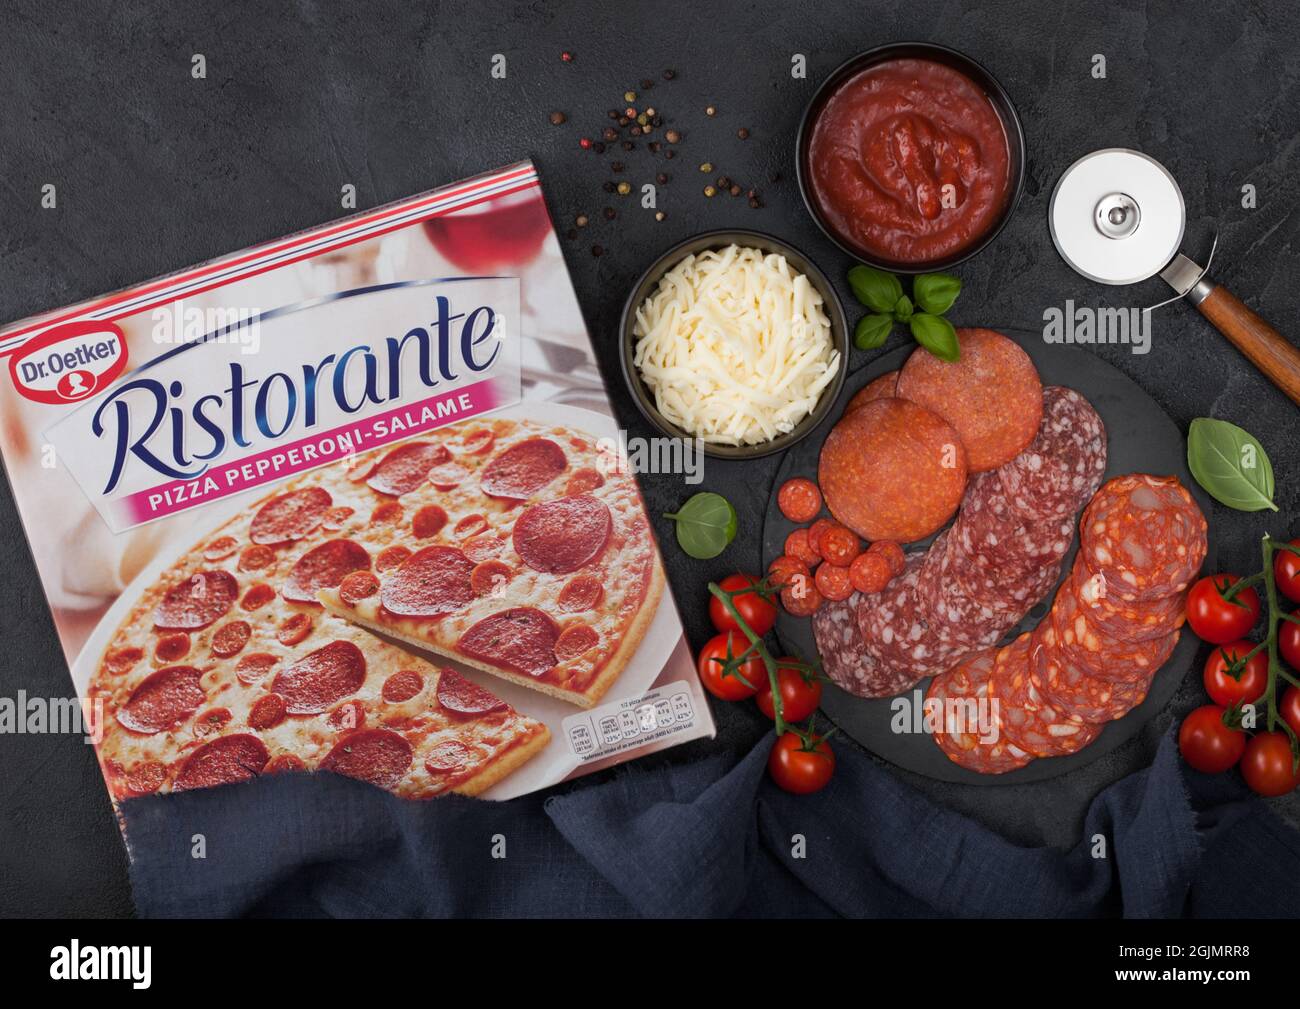 LONDON, UK - NOVEMBER 20, 2019: Box of Dr.Oetker Ristorante Pizza Pepperoni  with salami and ham, cheese and tomatoes on black background Stock Photo -  Alamy